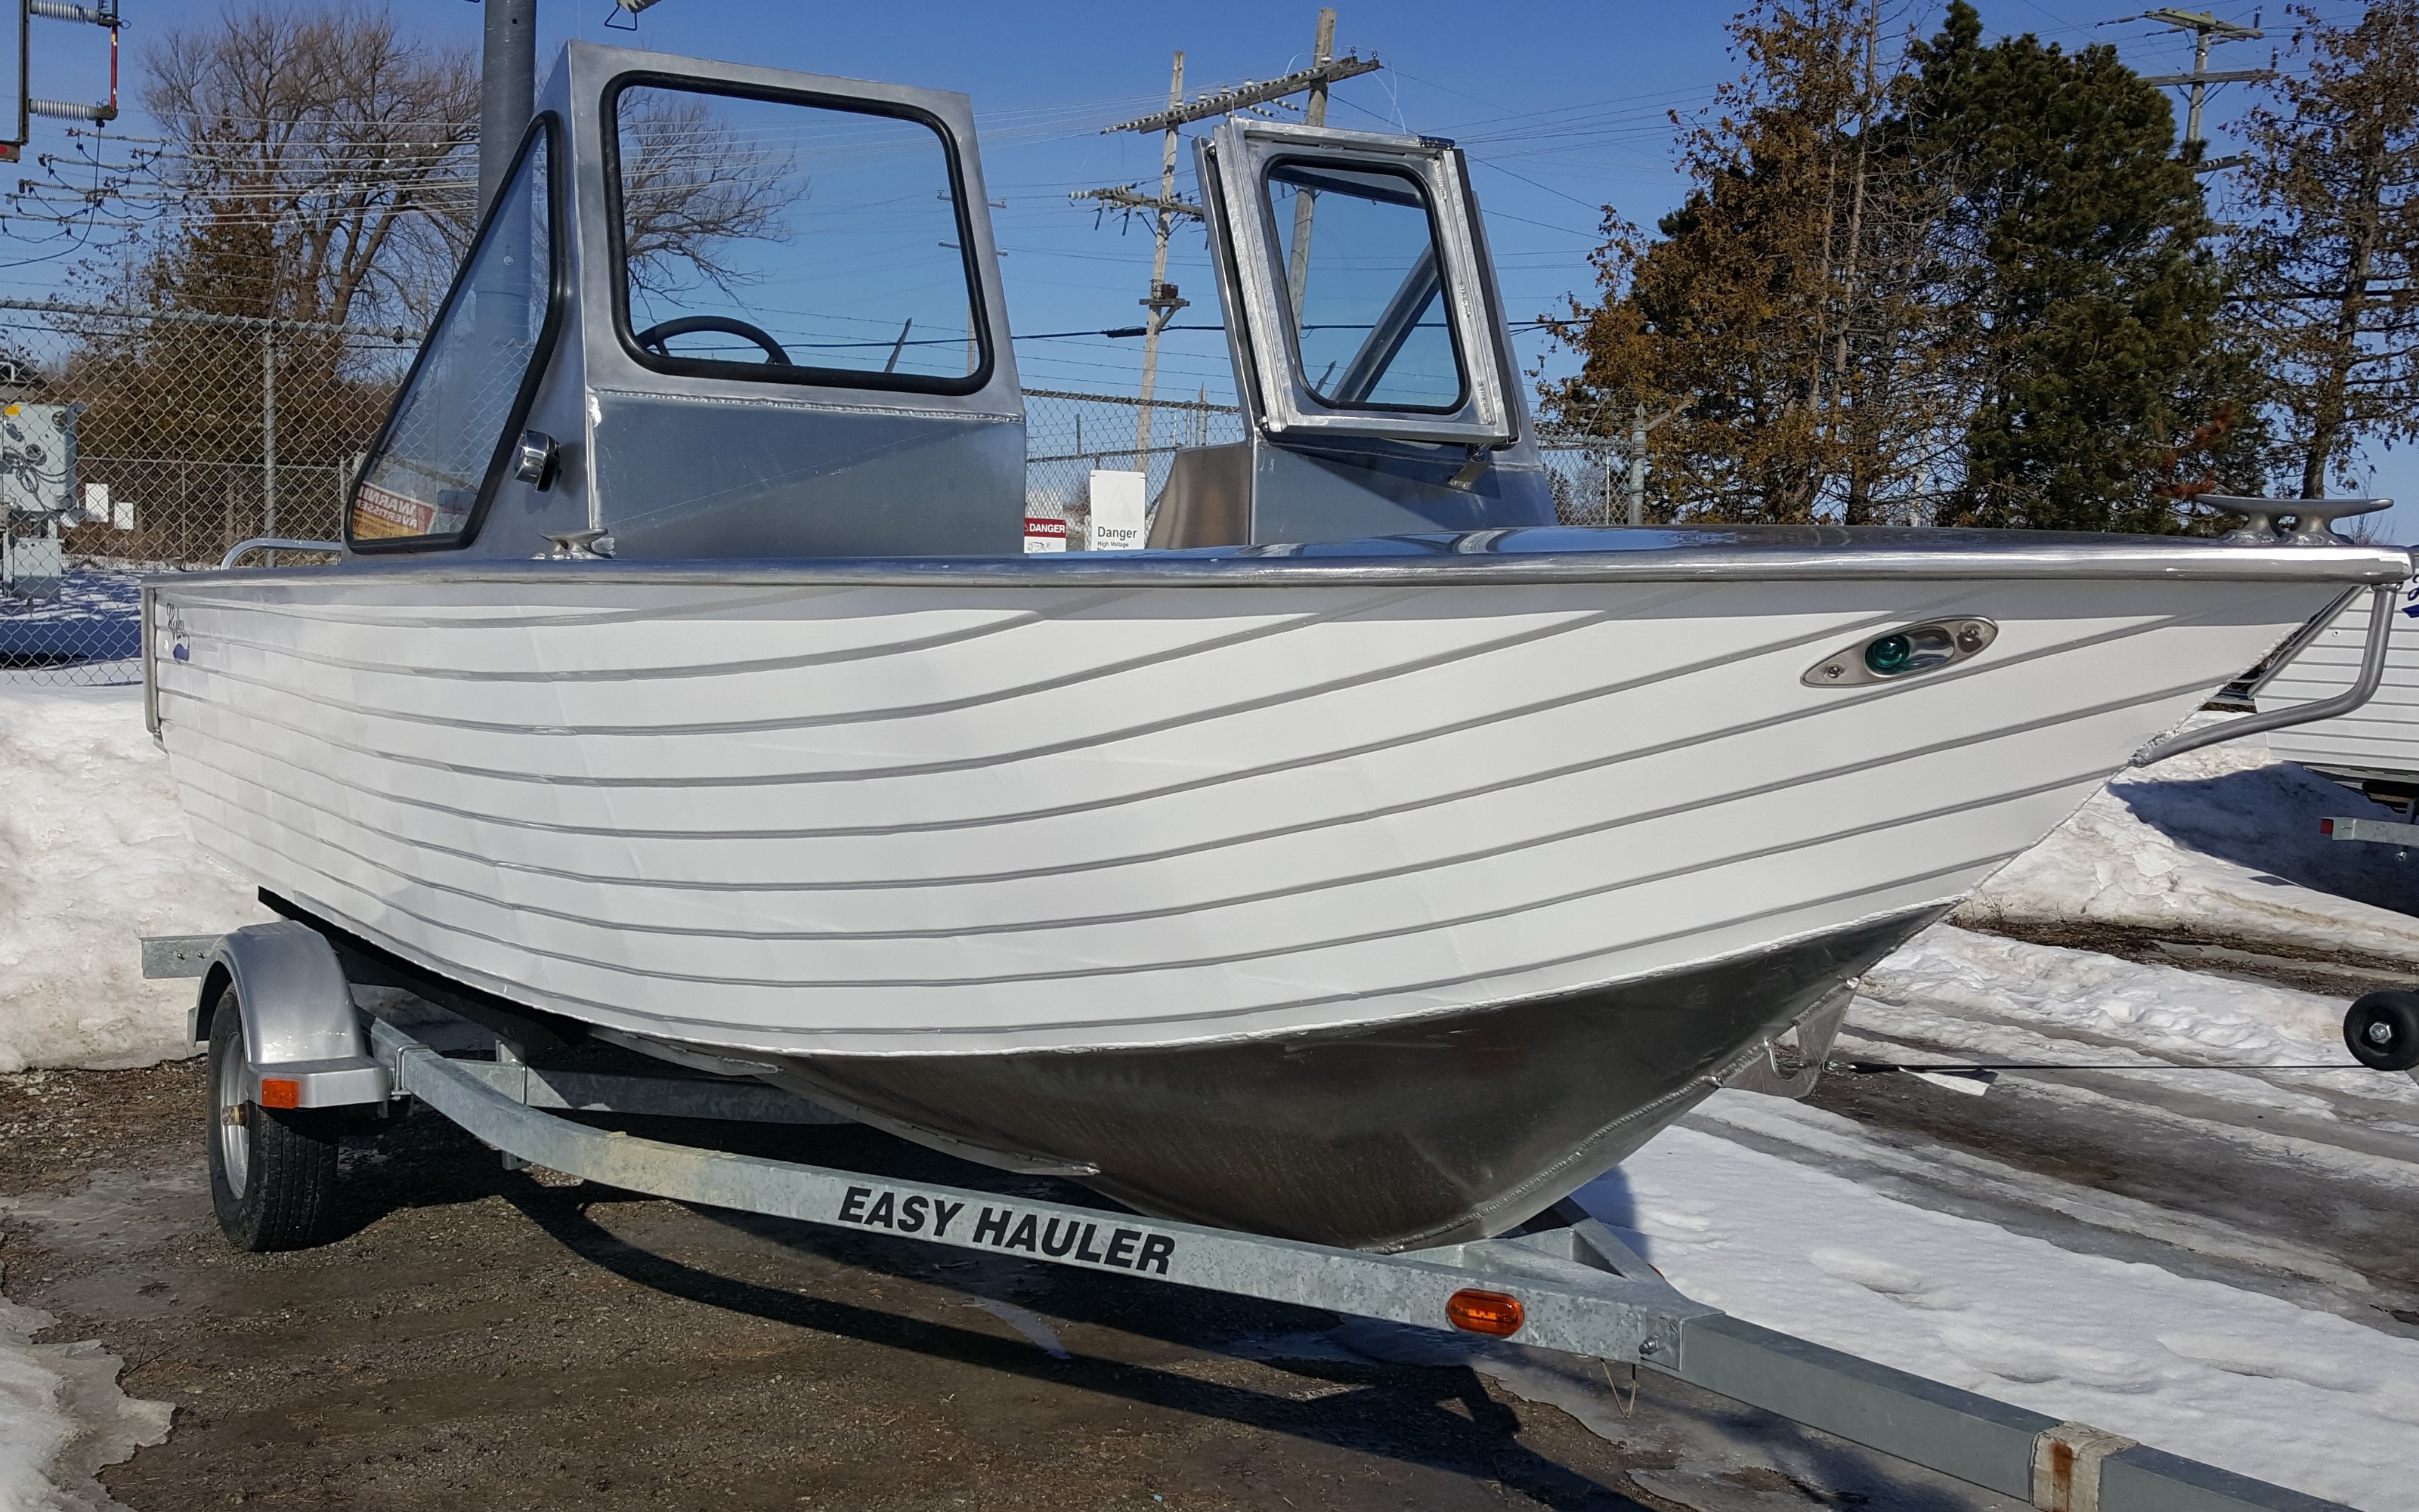 Boats for sale Canada, boats for sale, used boat sales, Fishing